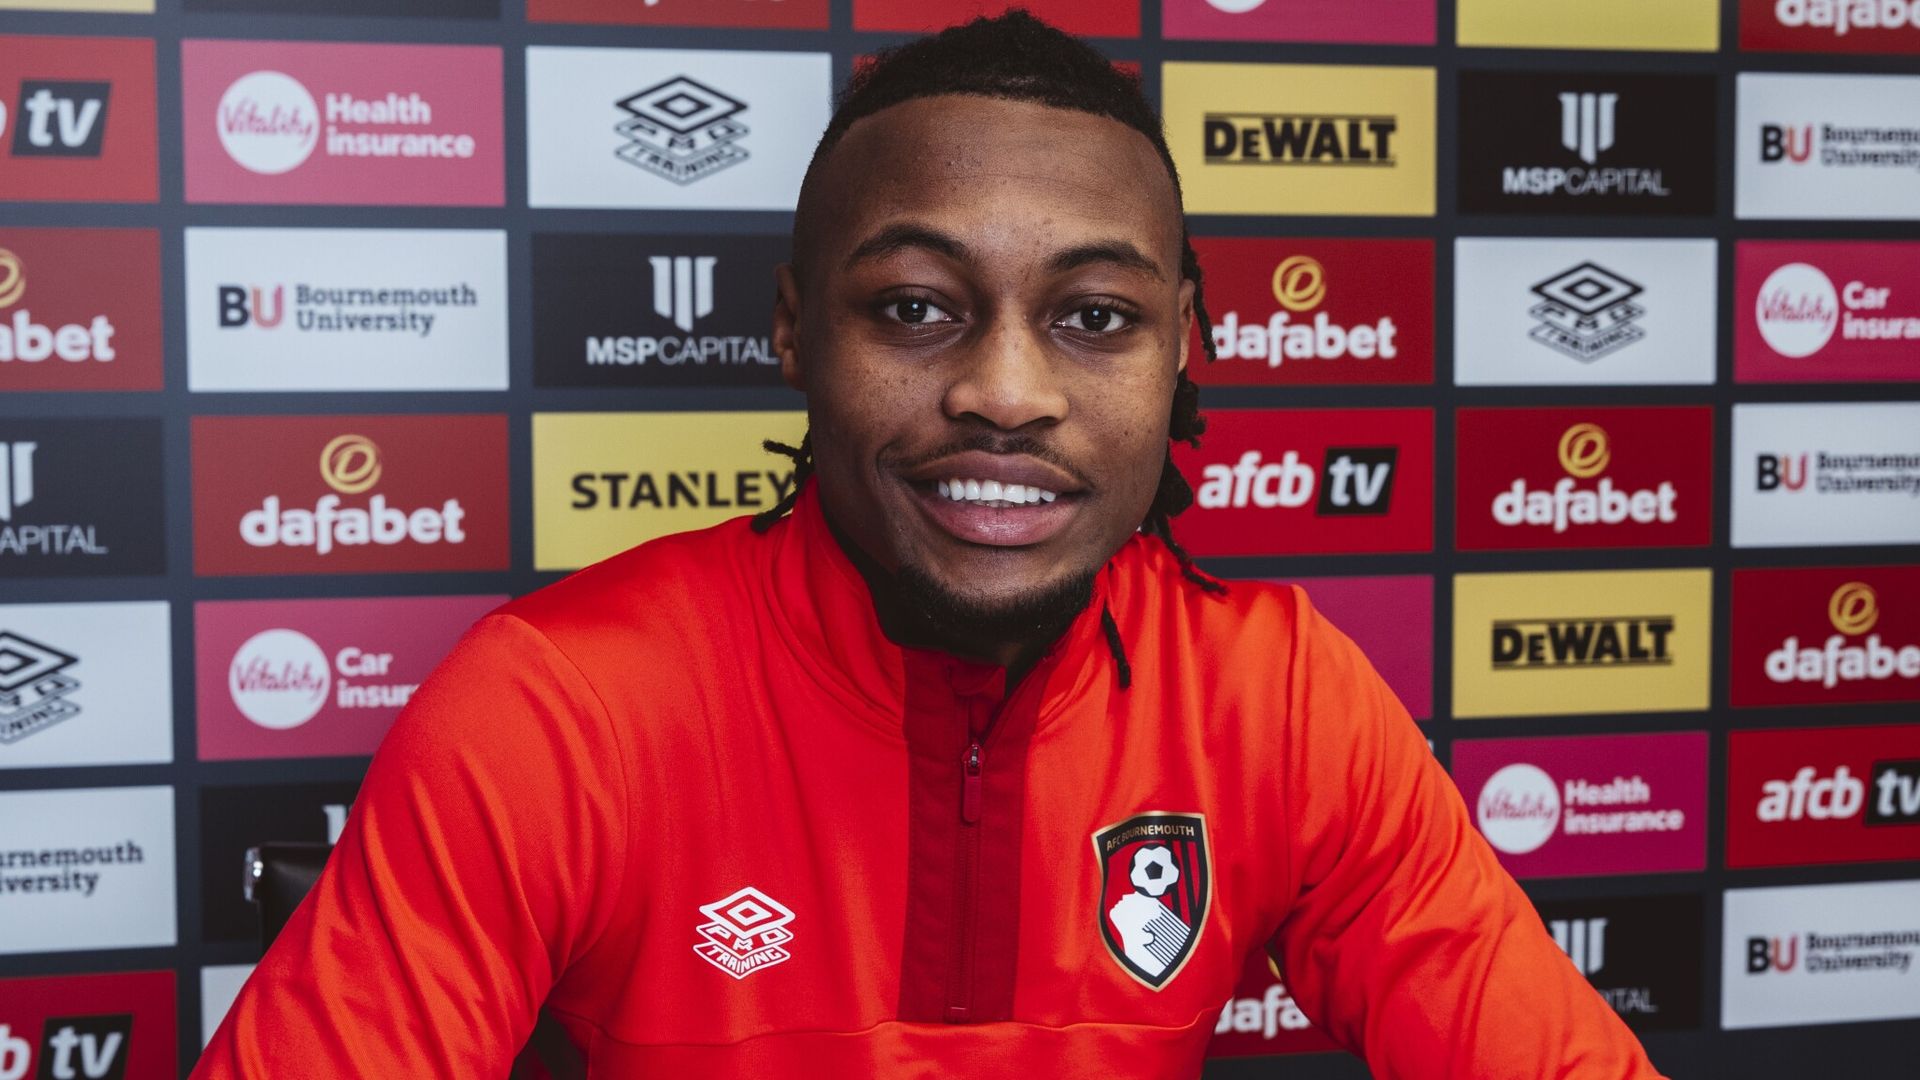 Bournemouth sign striker Semenyo from Bristol City in £10.5m deal